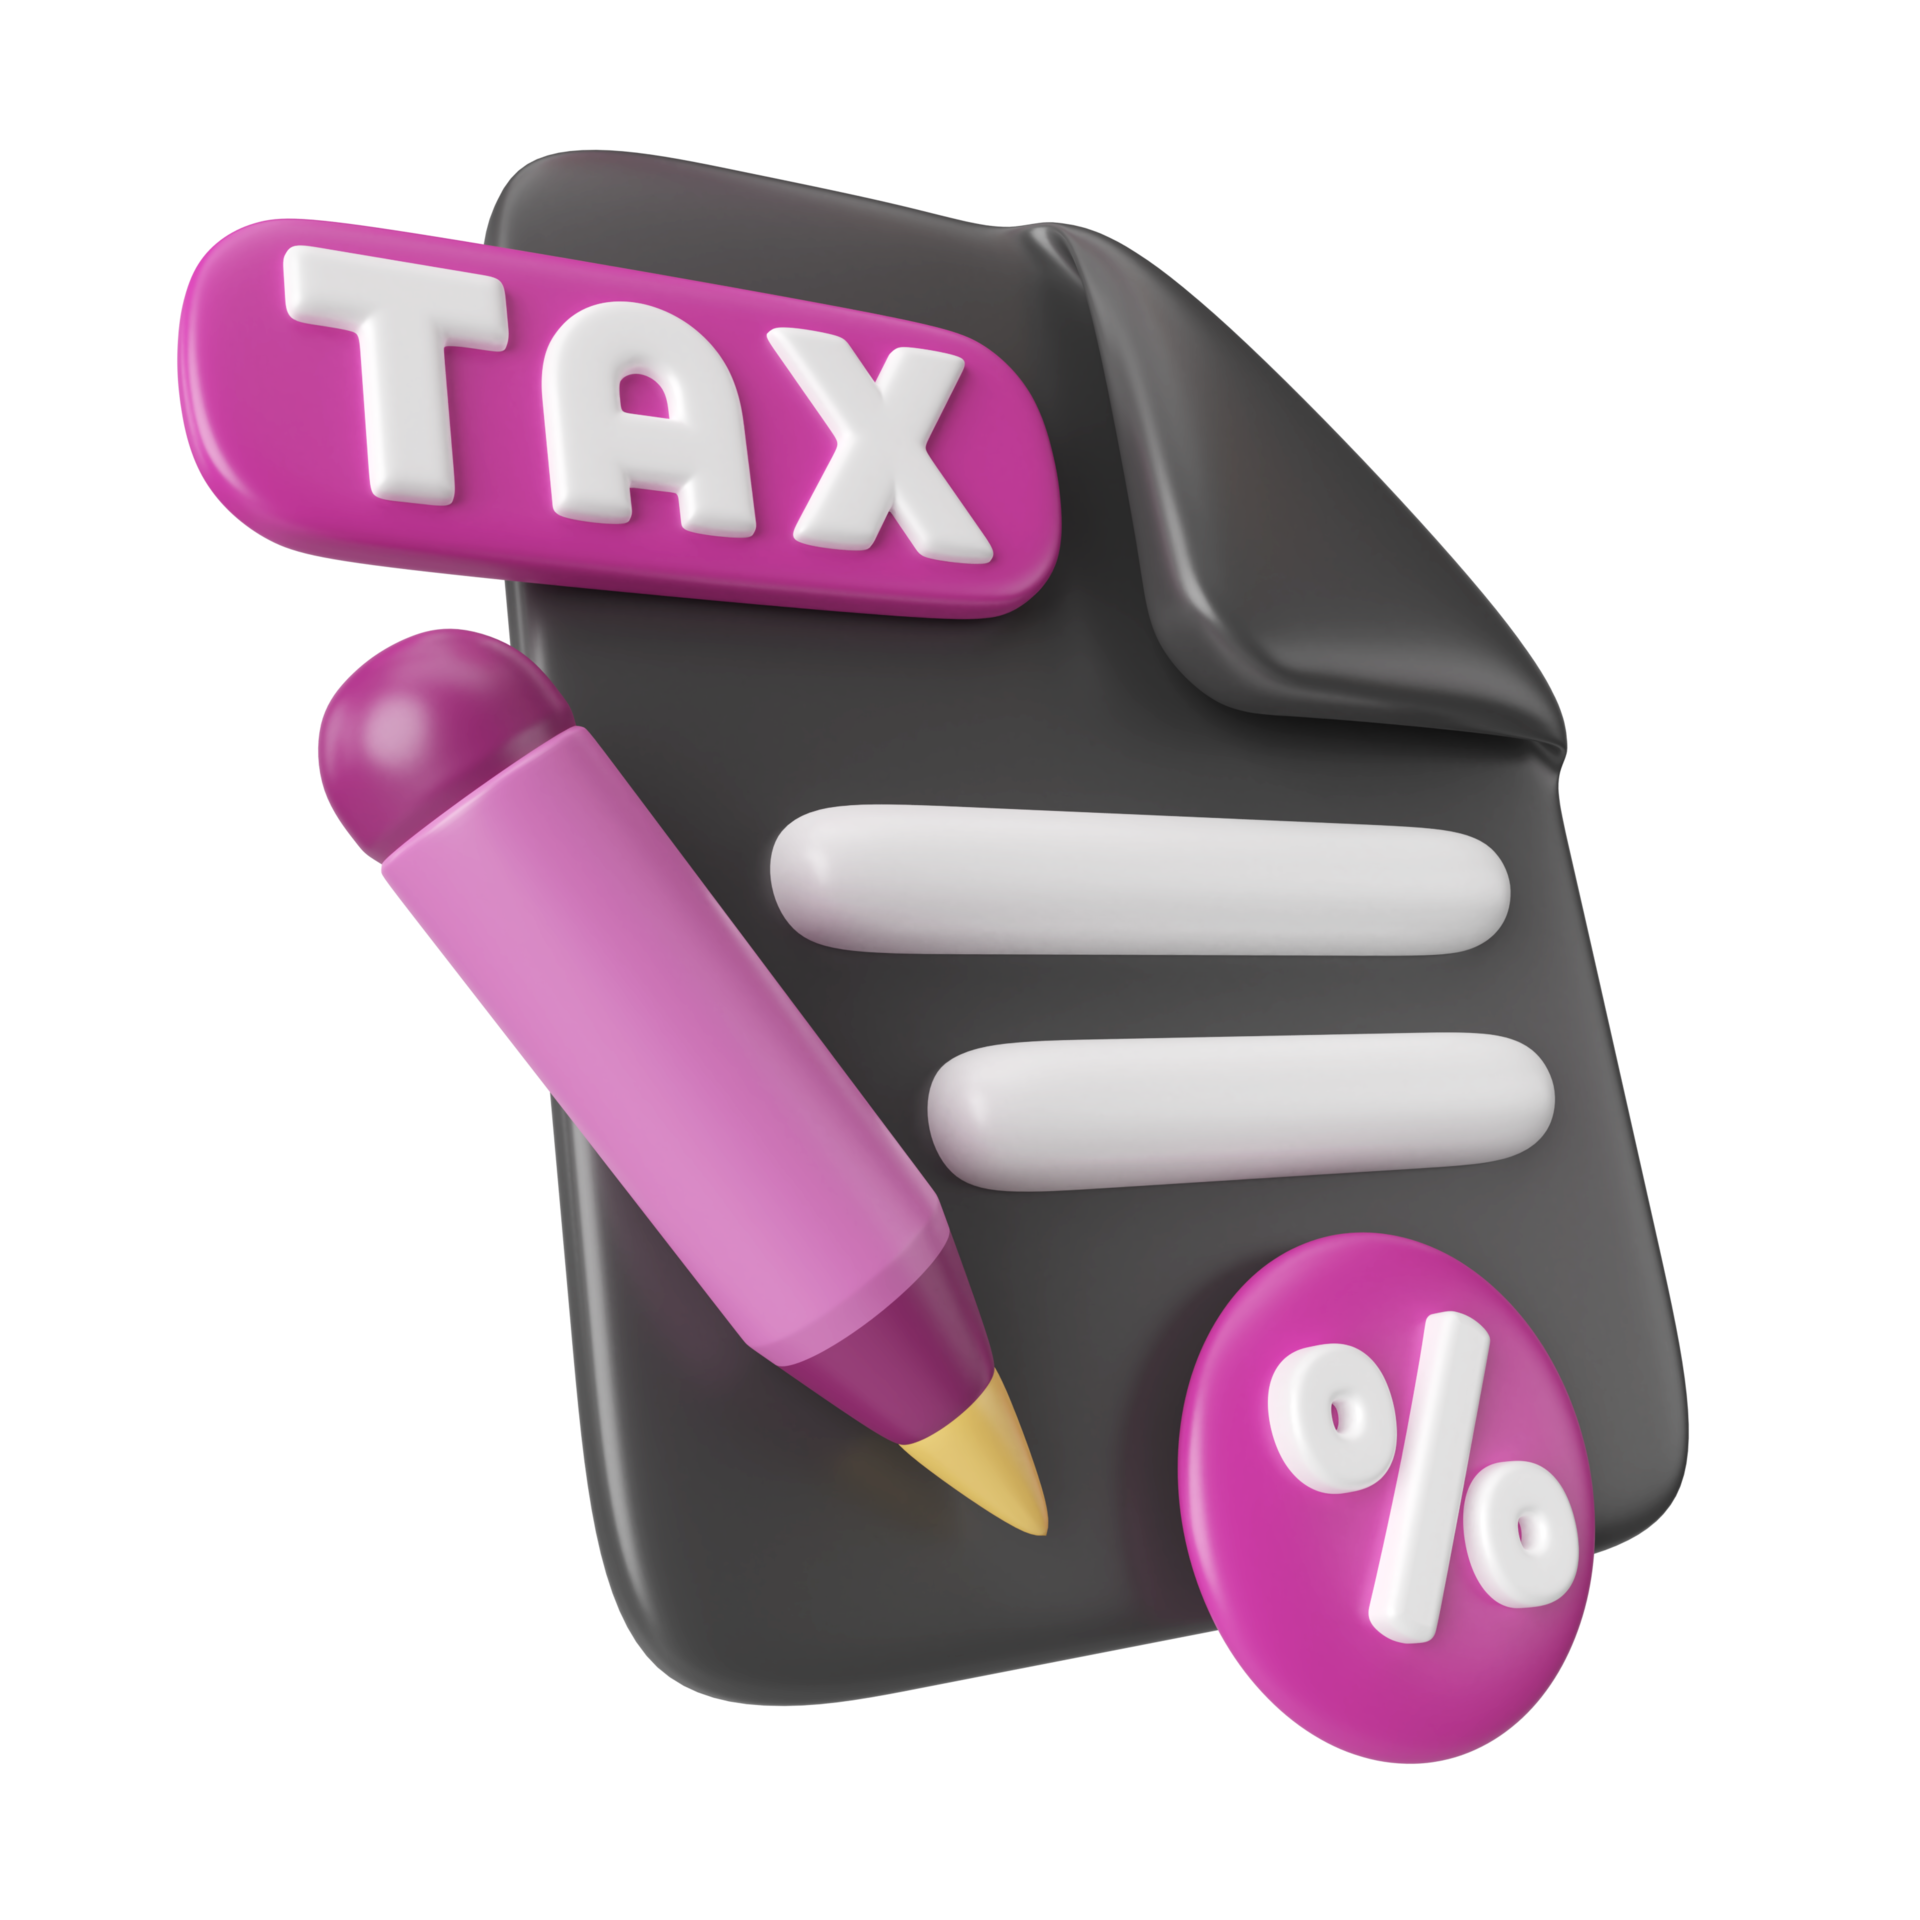 taxes-3d-illustration-icon-png